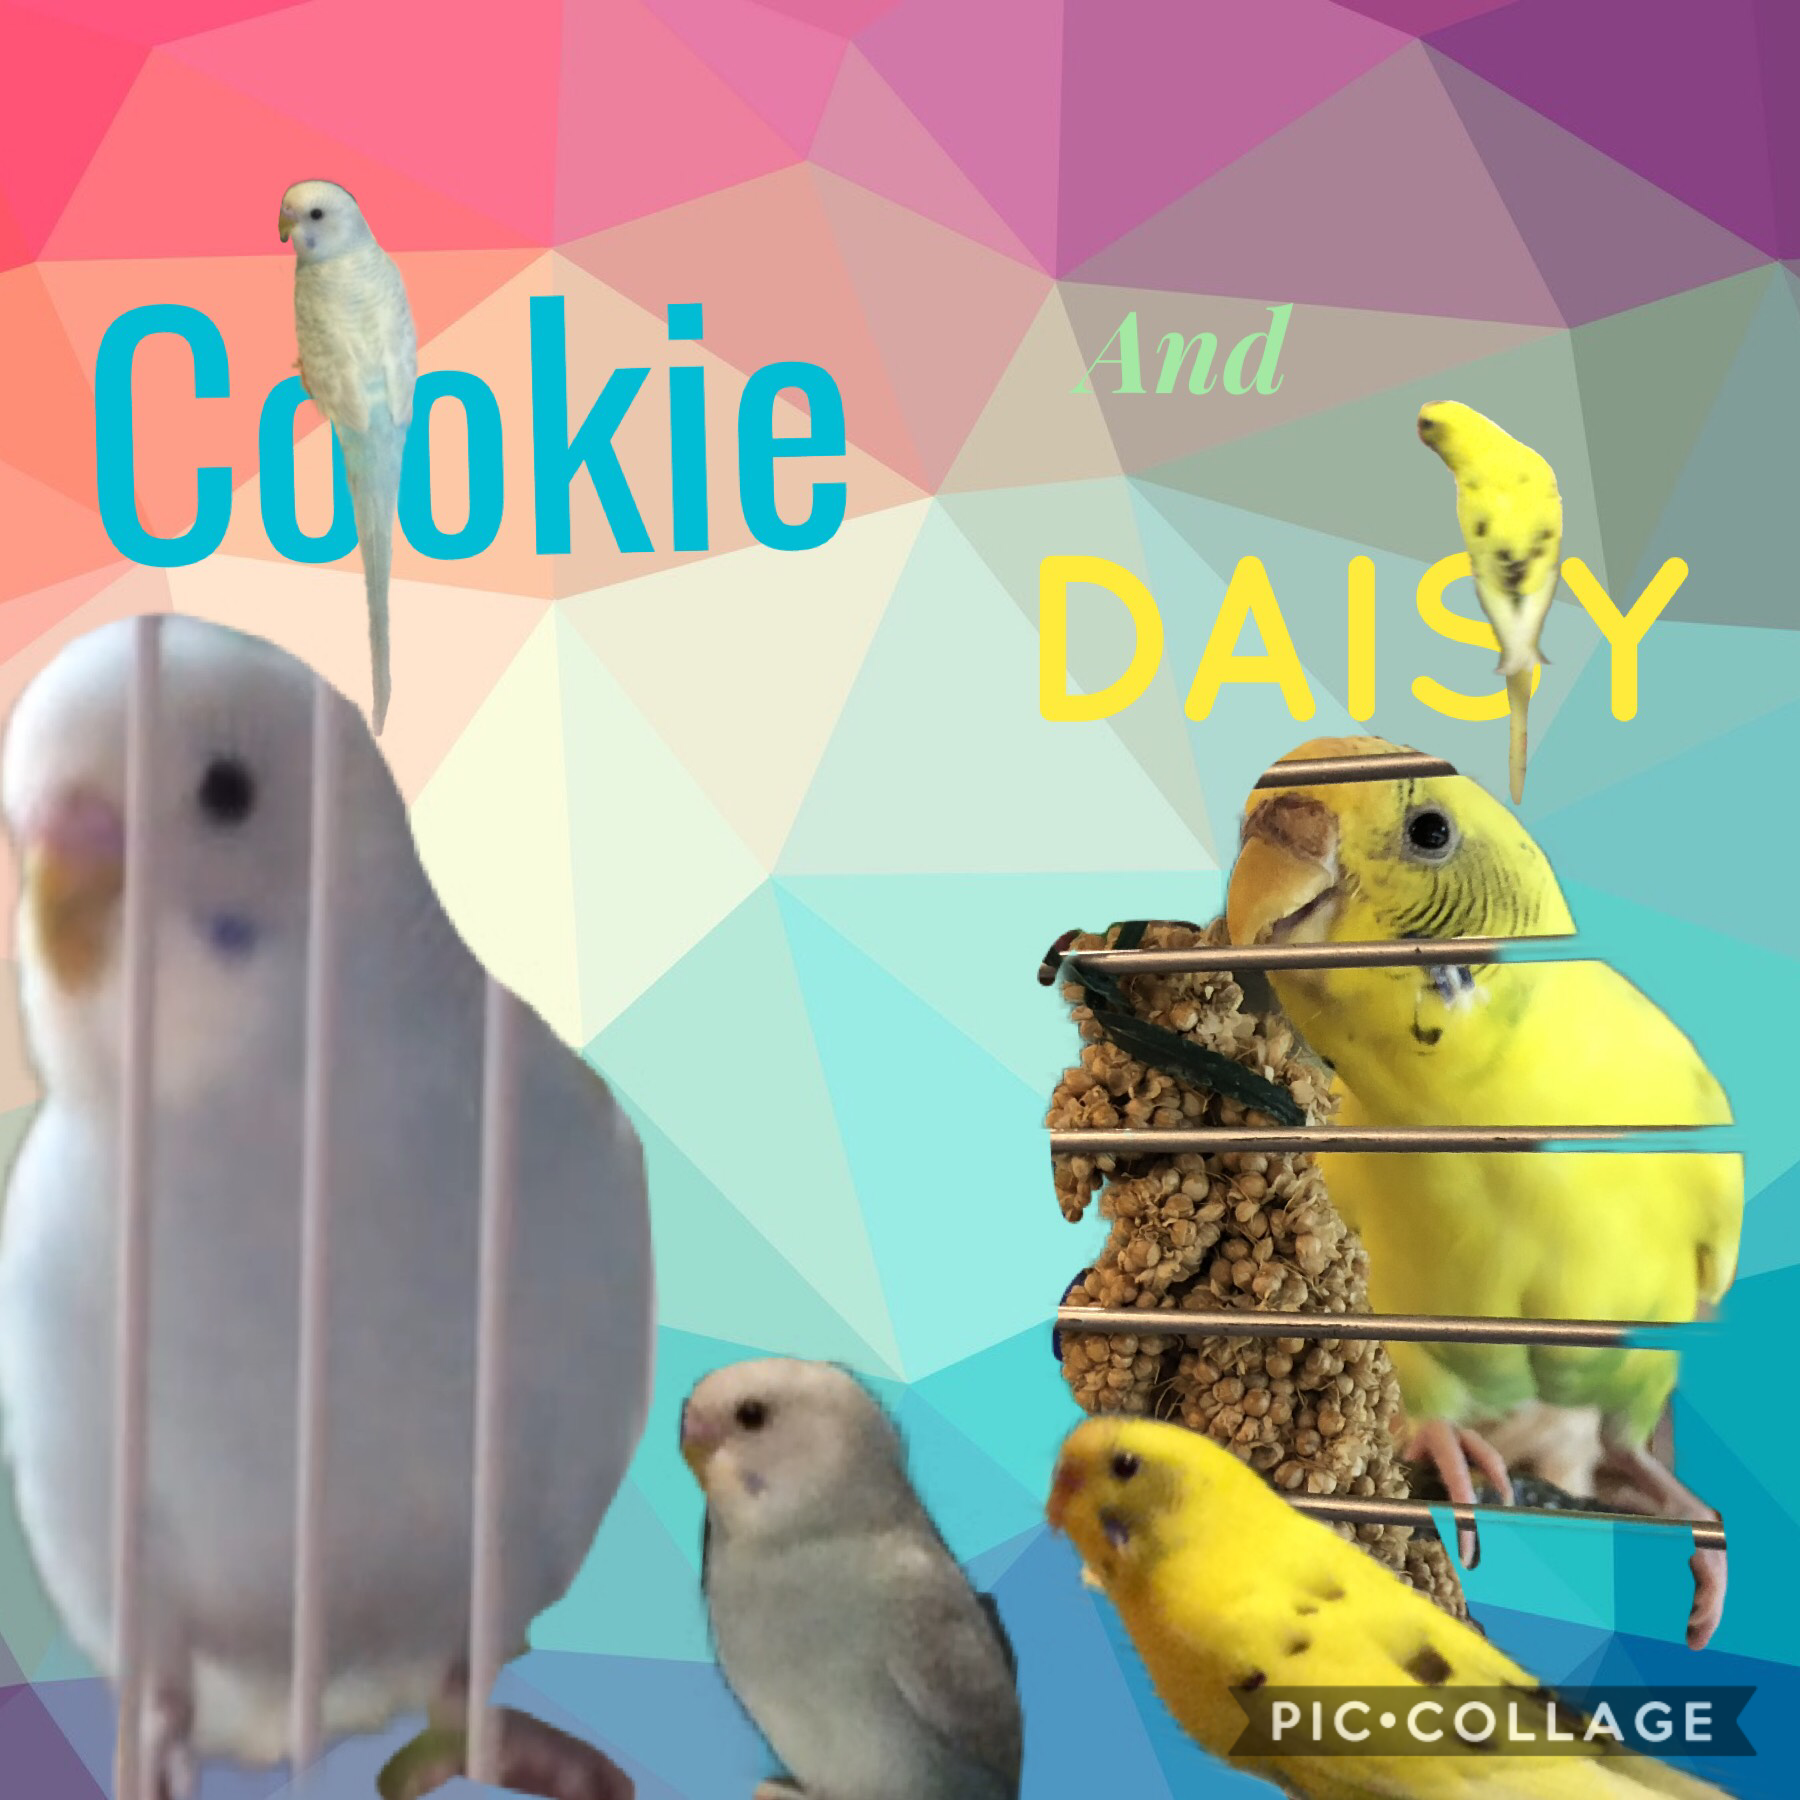 These are my budgies! I love them so much!